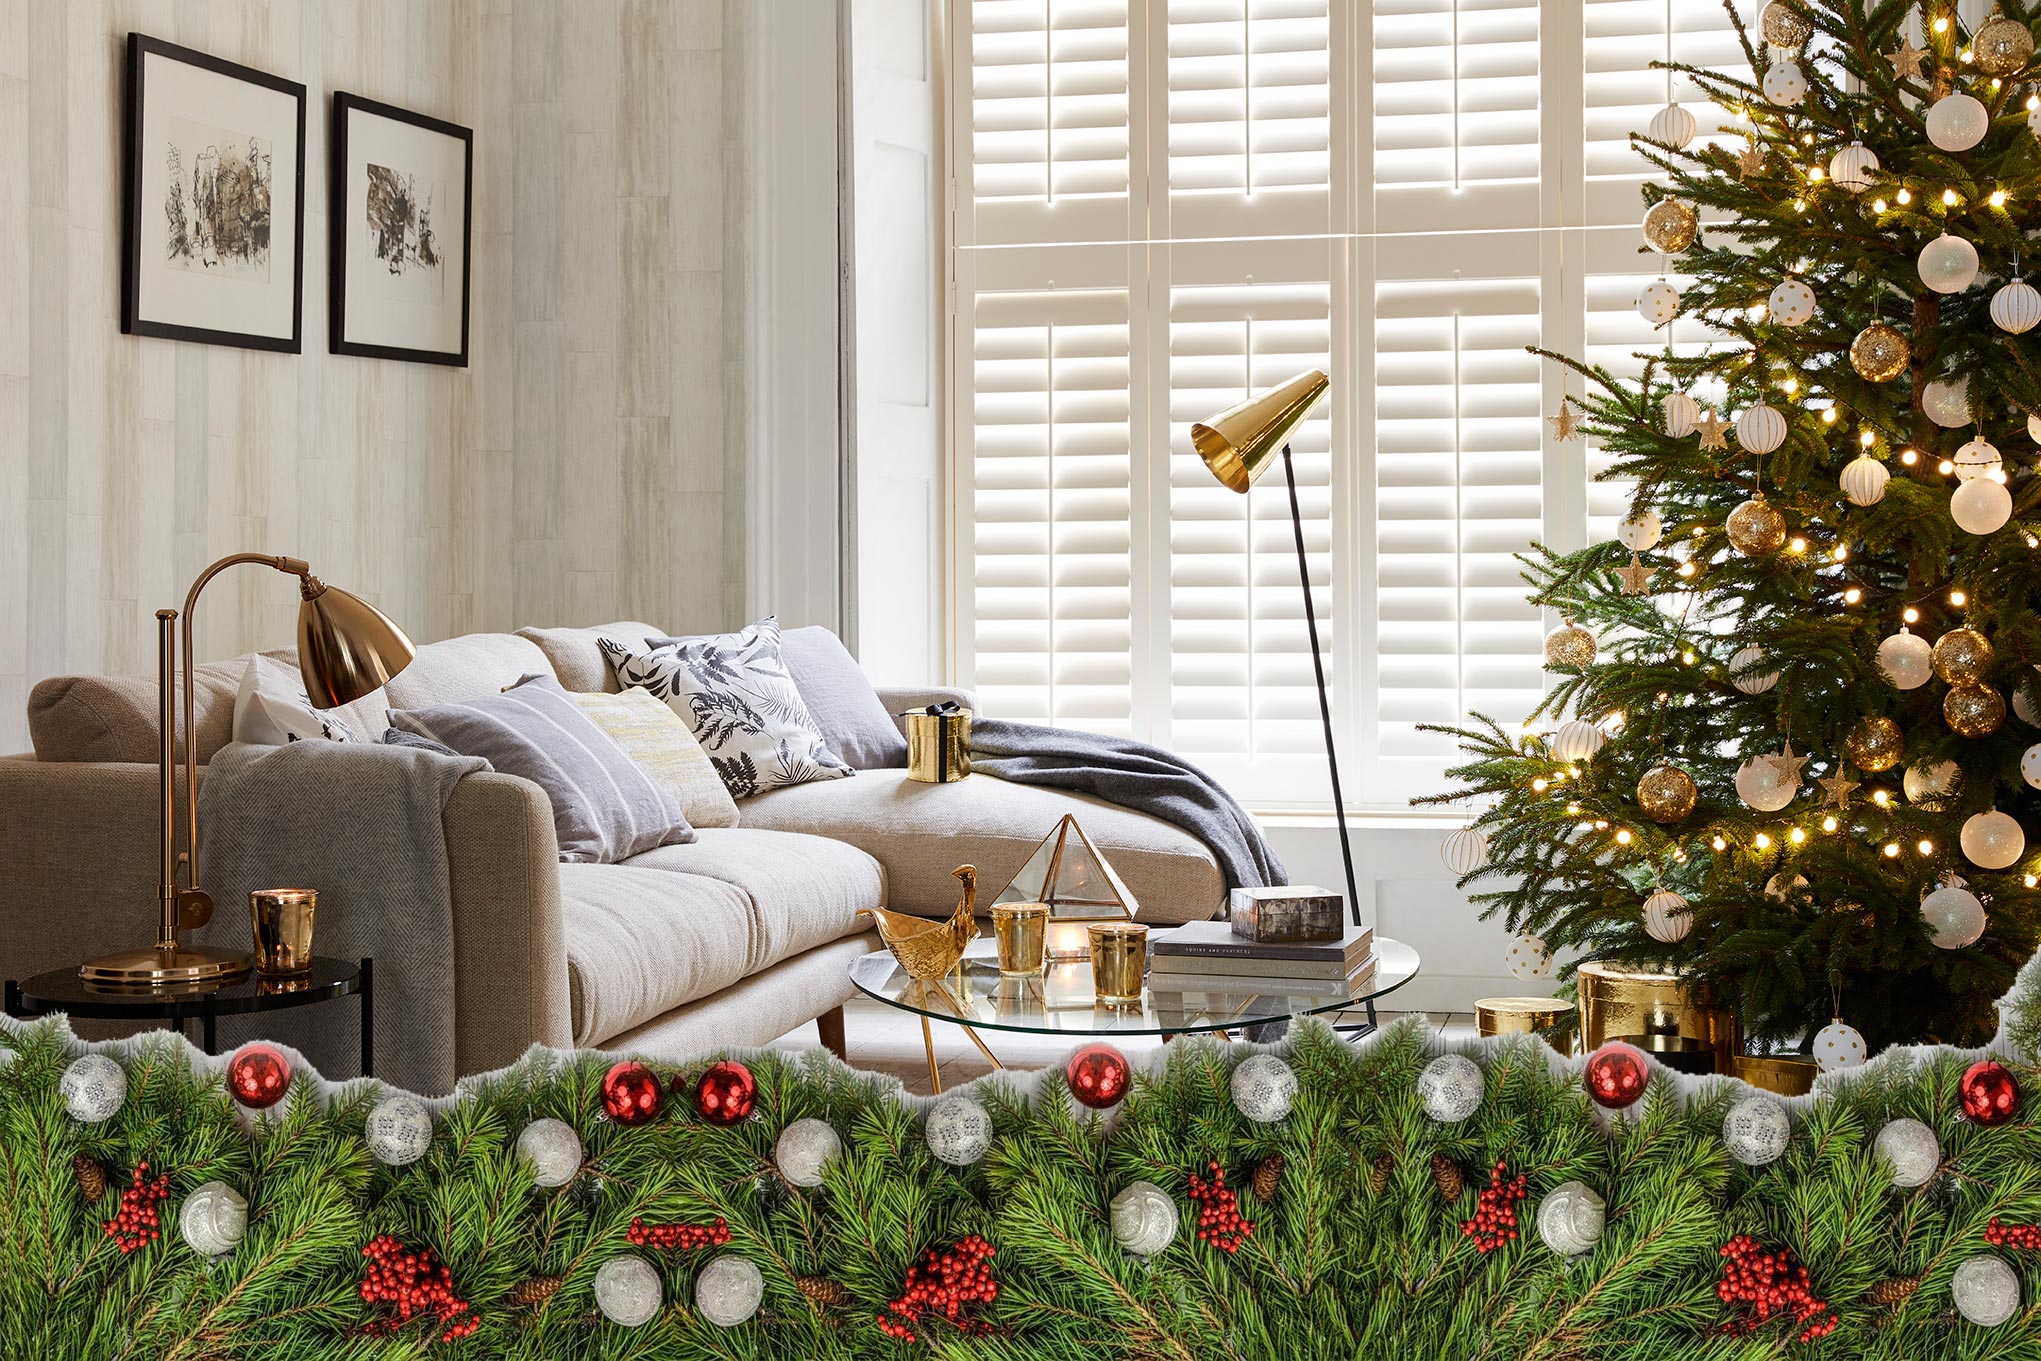 Plantation Shutters deal for Christmas